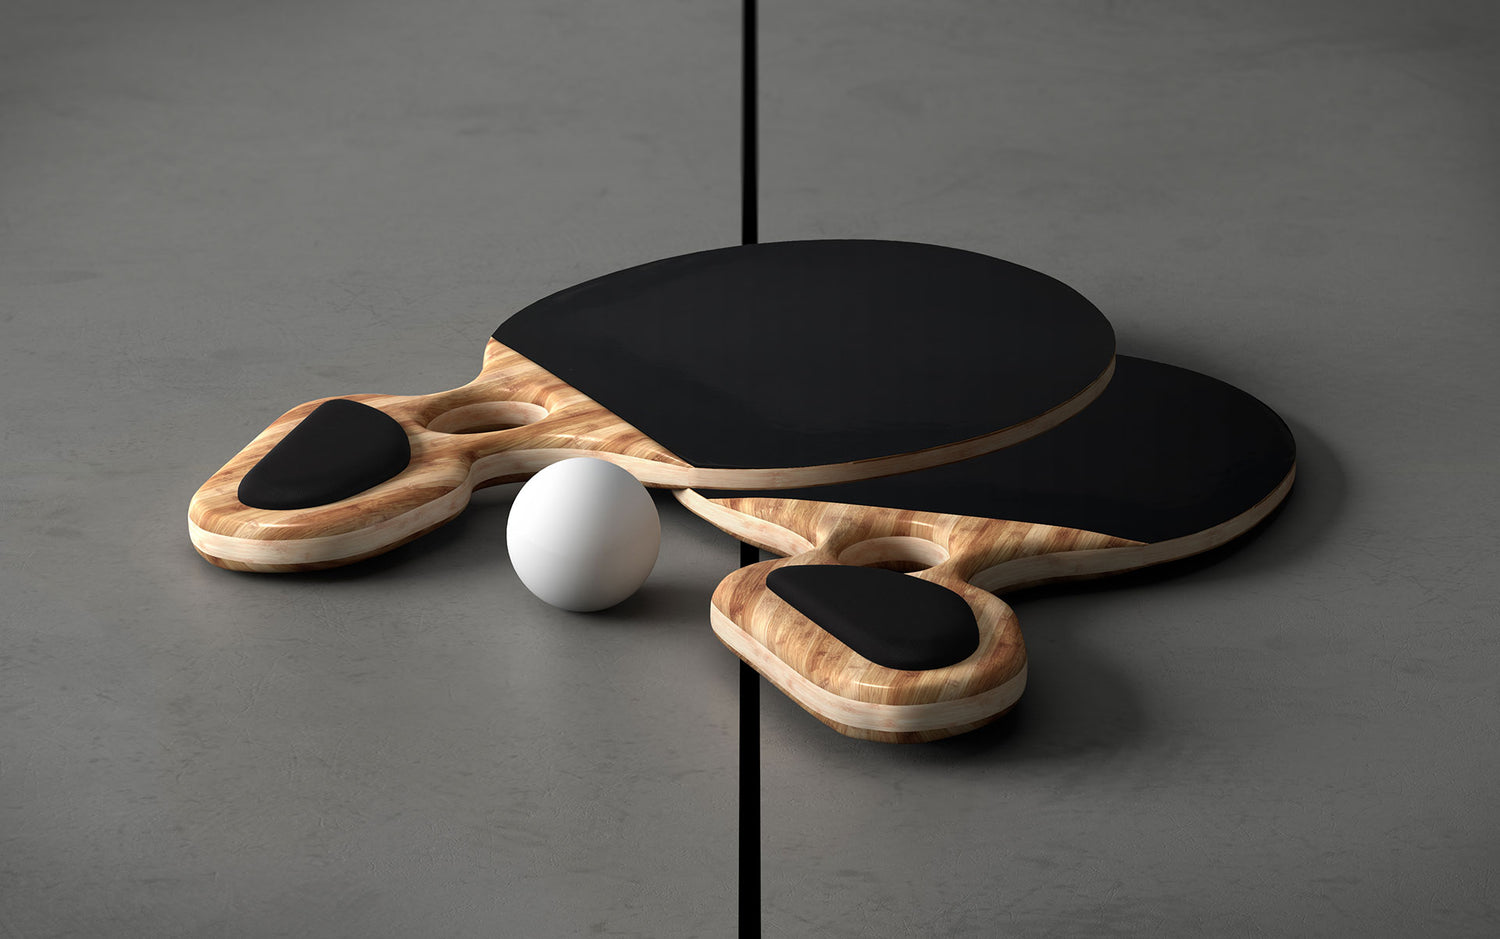 Two ping pong paddles sitting next to a ball on a grey table.